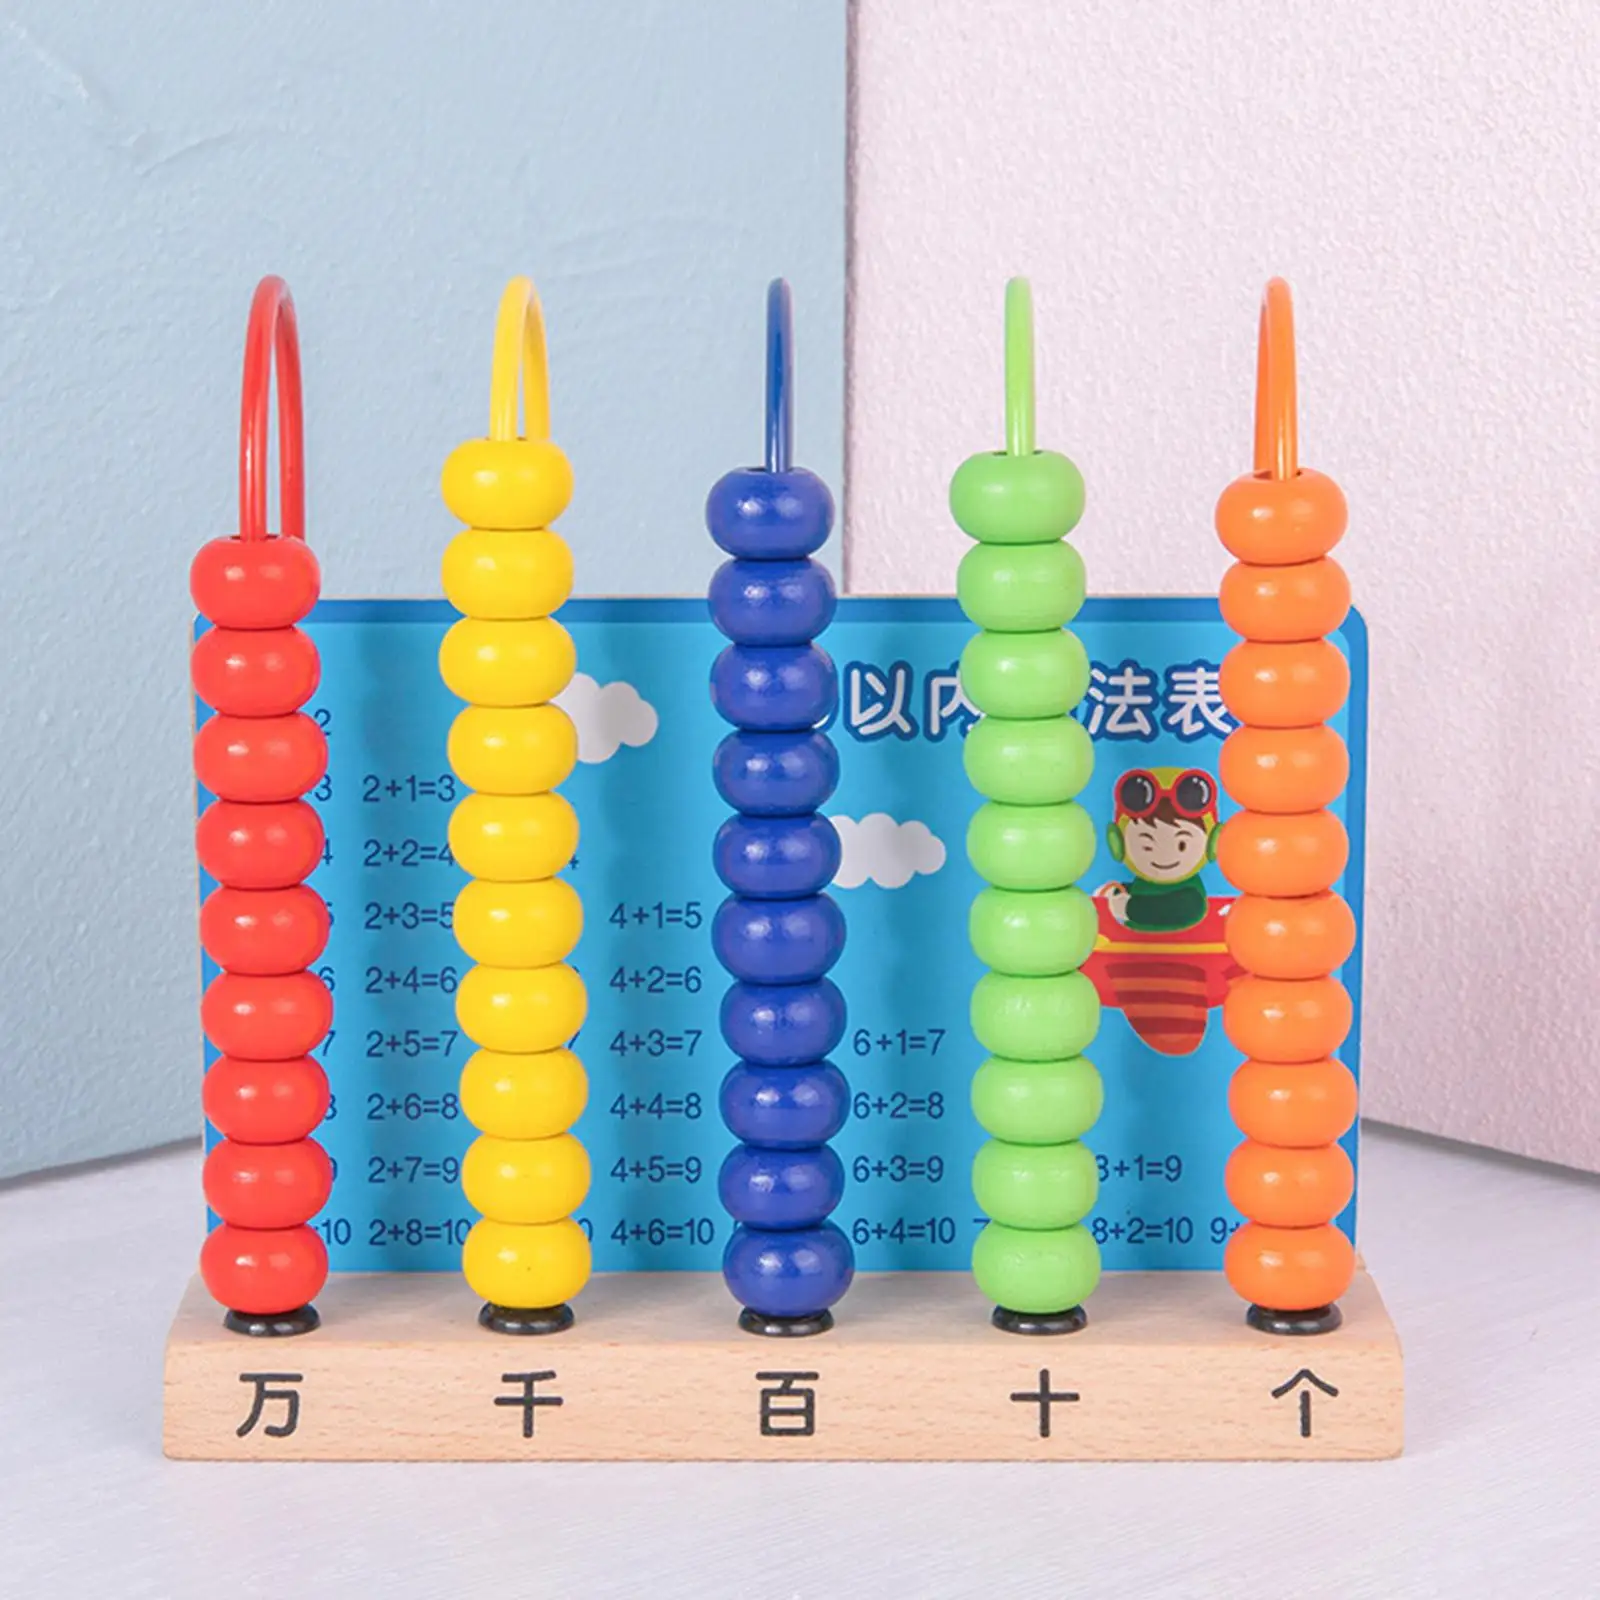 Wooden 5 Rod Counting ,Early Math Skills,Colorful Beads Math Toys,Preschool Numbers Counting Calculating  for Toddlers